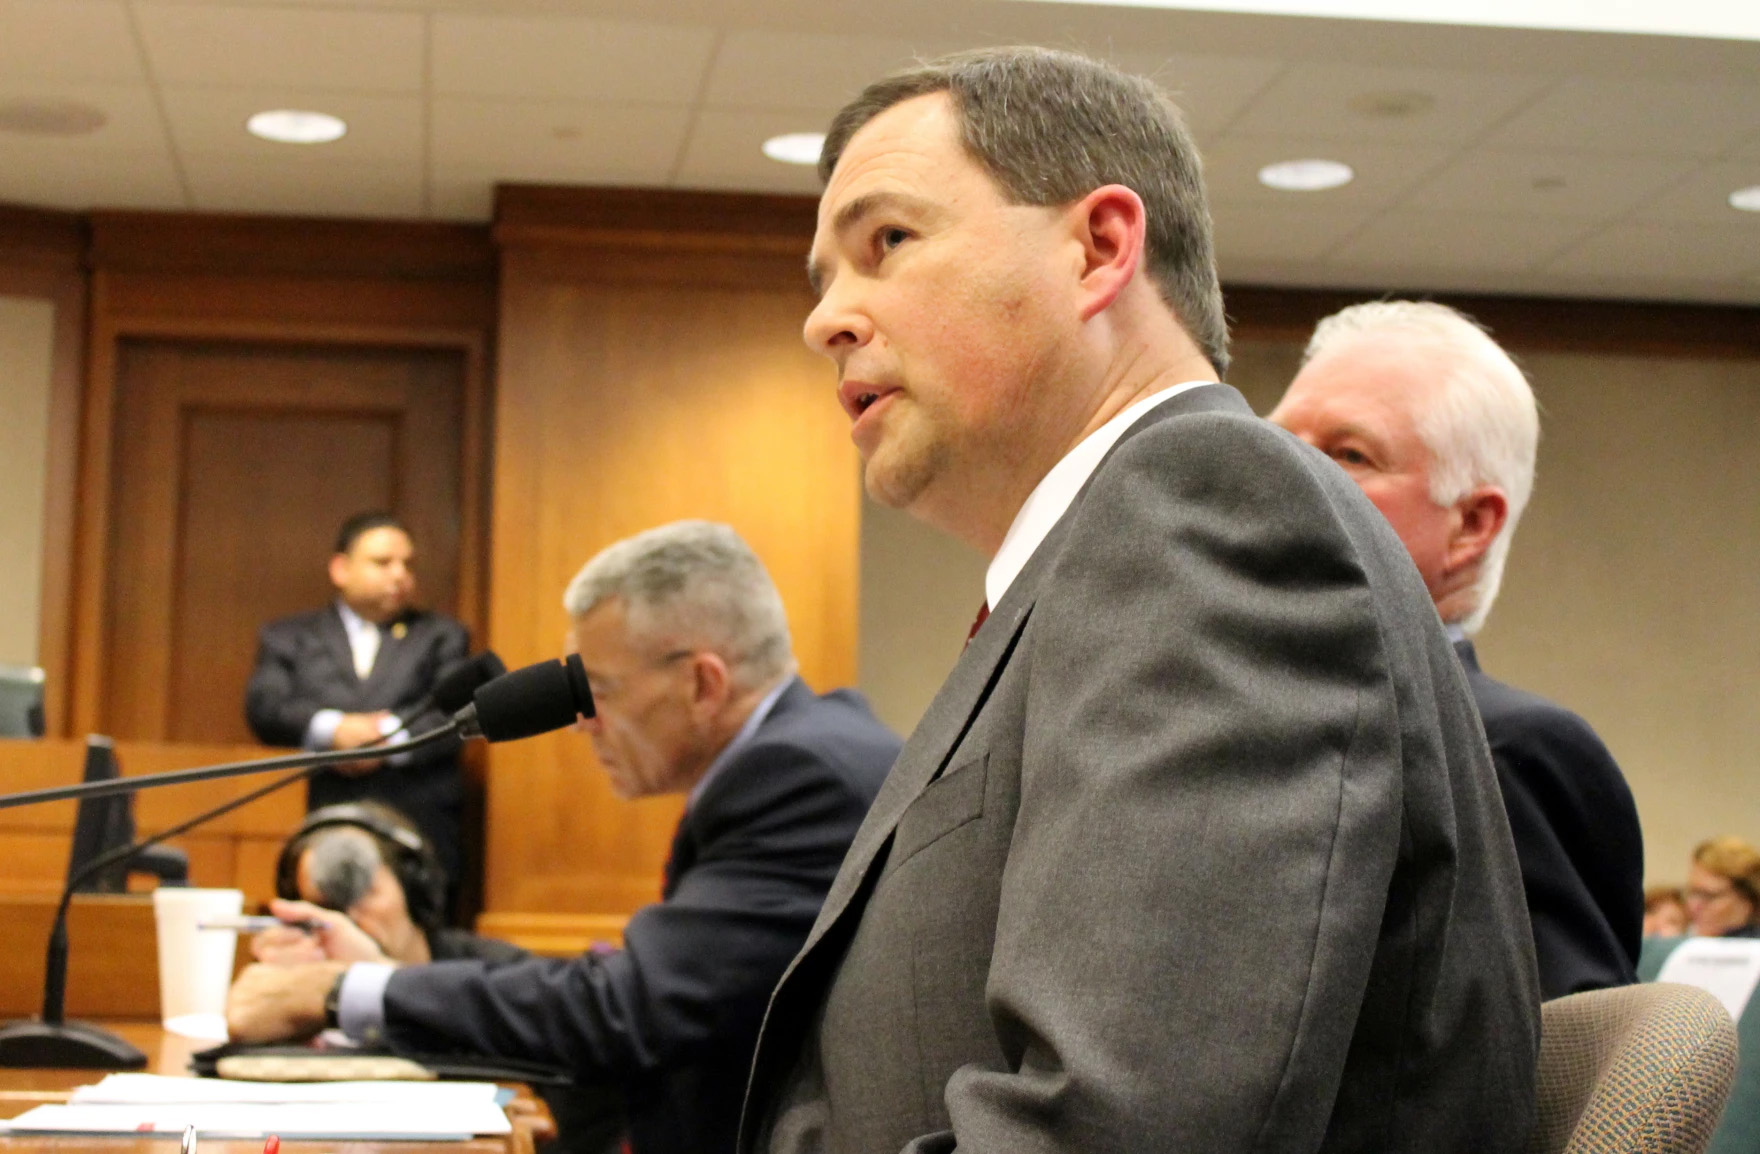 A seated man dressed in a suit is seen from the side speaking into a microphone. He appears to be in a courtroom. This is Brandon Woods, executive director of the Texas Commission on Jail Standards.